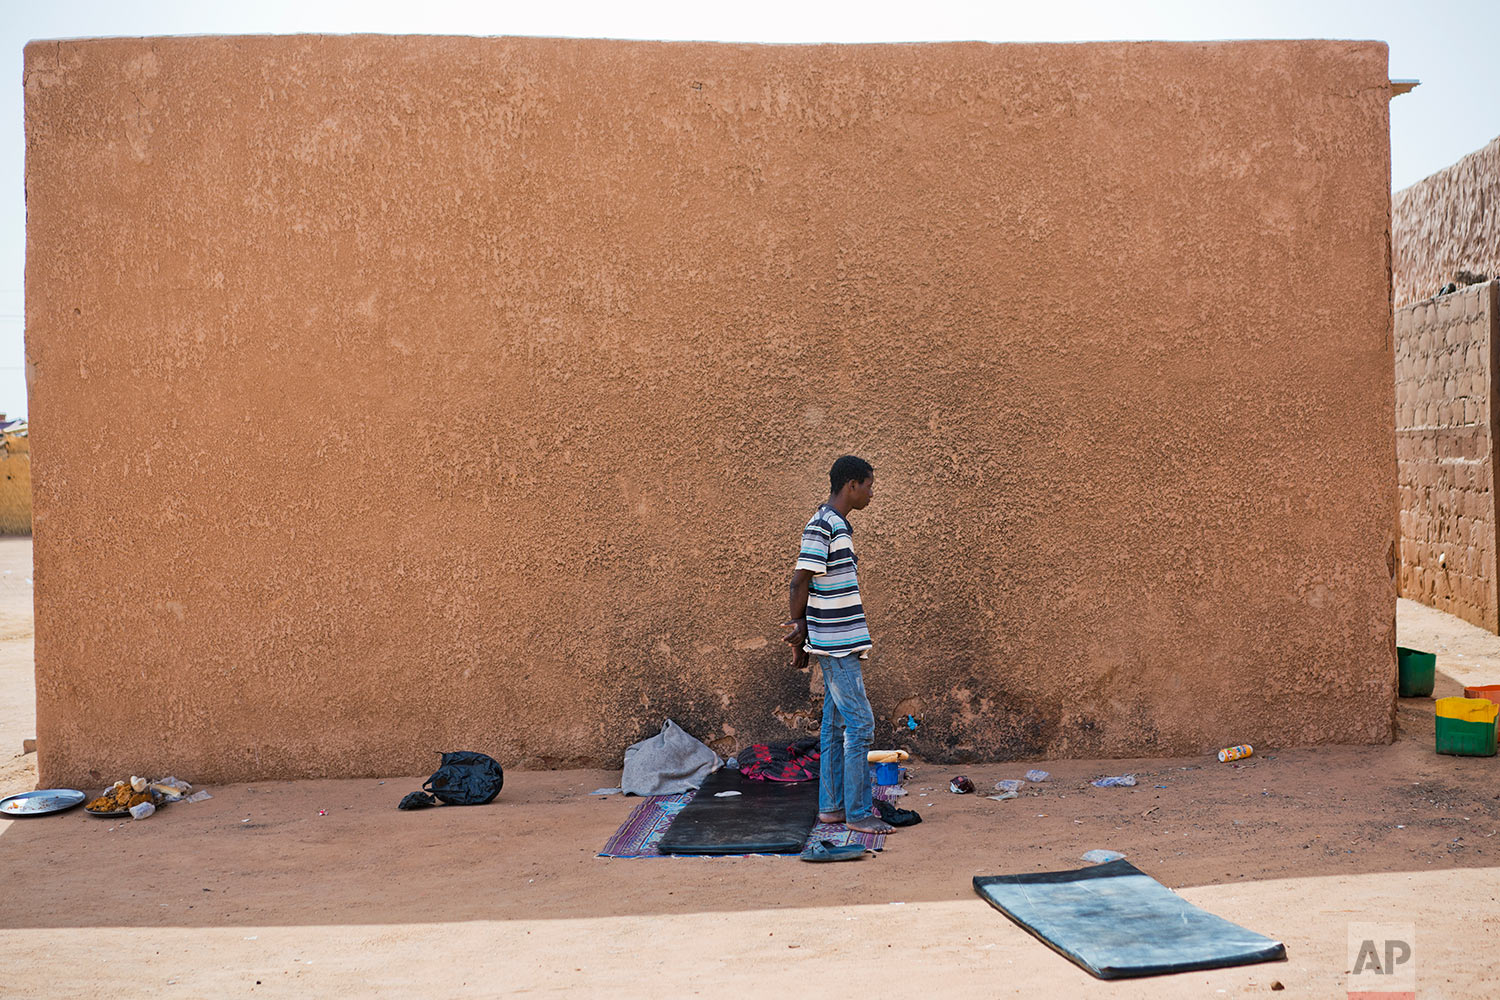  A young migrant who has been expelled from Algeria stands in a transit center in Arlit, Niger, on June 2, 2018. (AP Photo/Jerome Delay) 